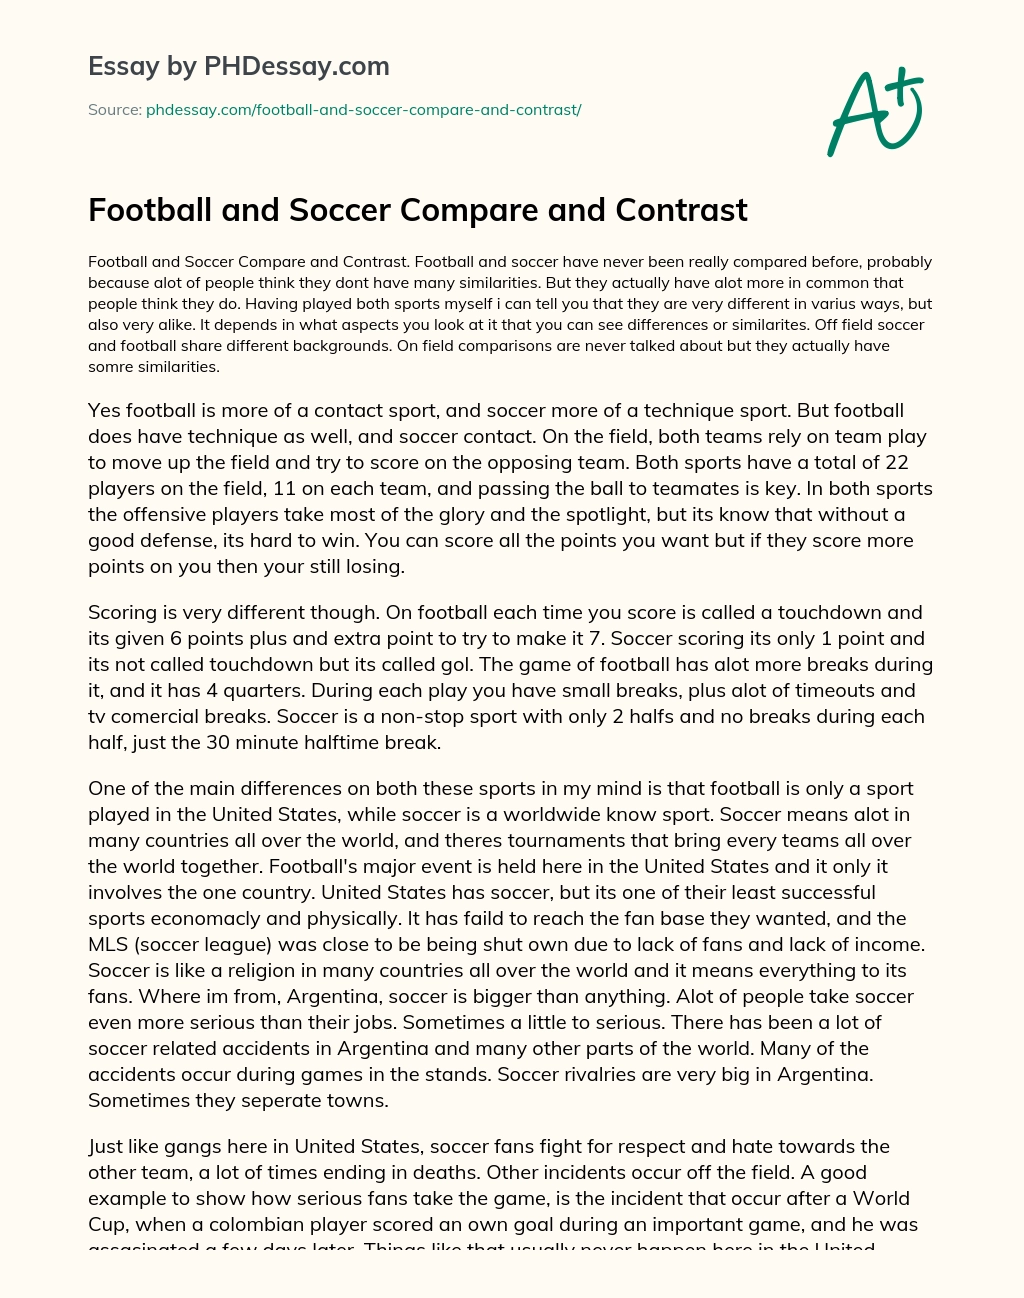 Football and Soccer Compare and Contrast essay